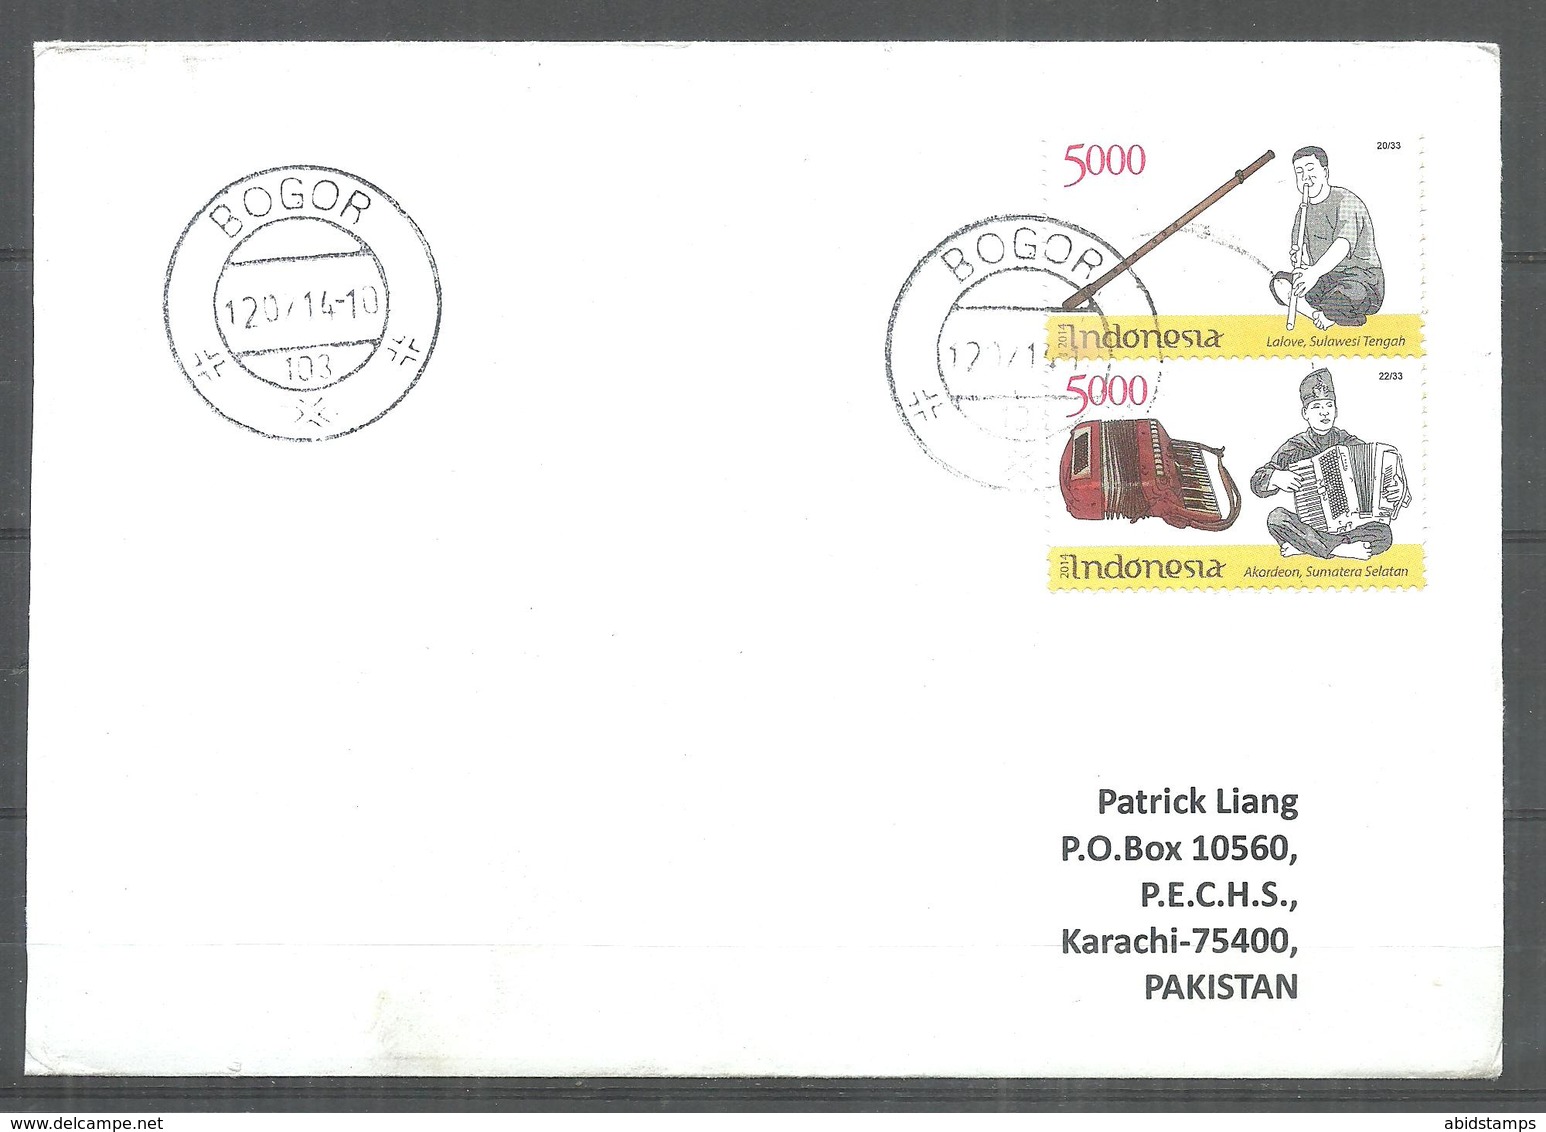 USED AIR MAIL COVER INDONESIA TO PAKISTAN MUSICAL INSTRUMENT - Indonesia